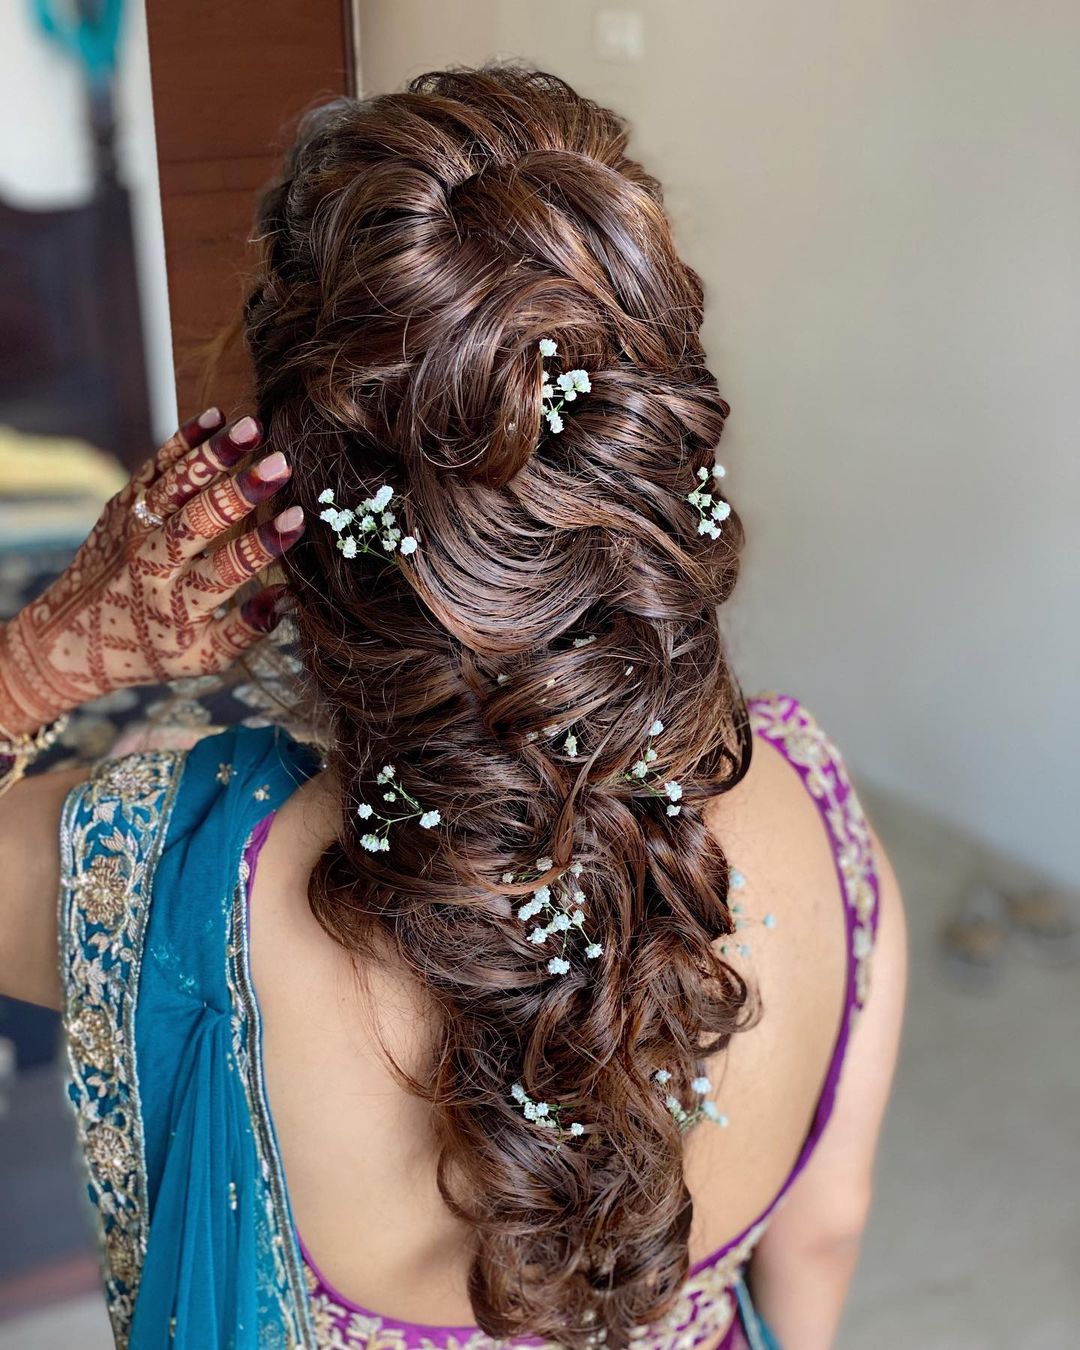 Hairstyle ideas for the short-hair bride | Femina.in